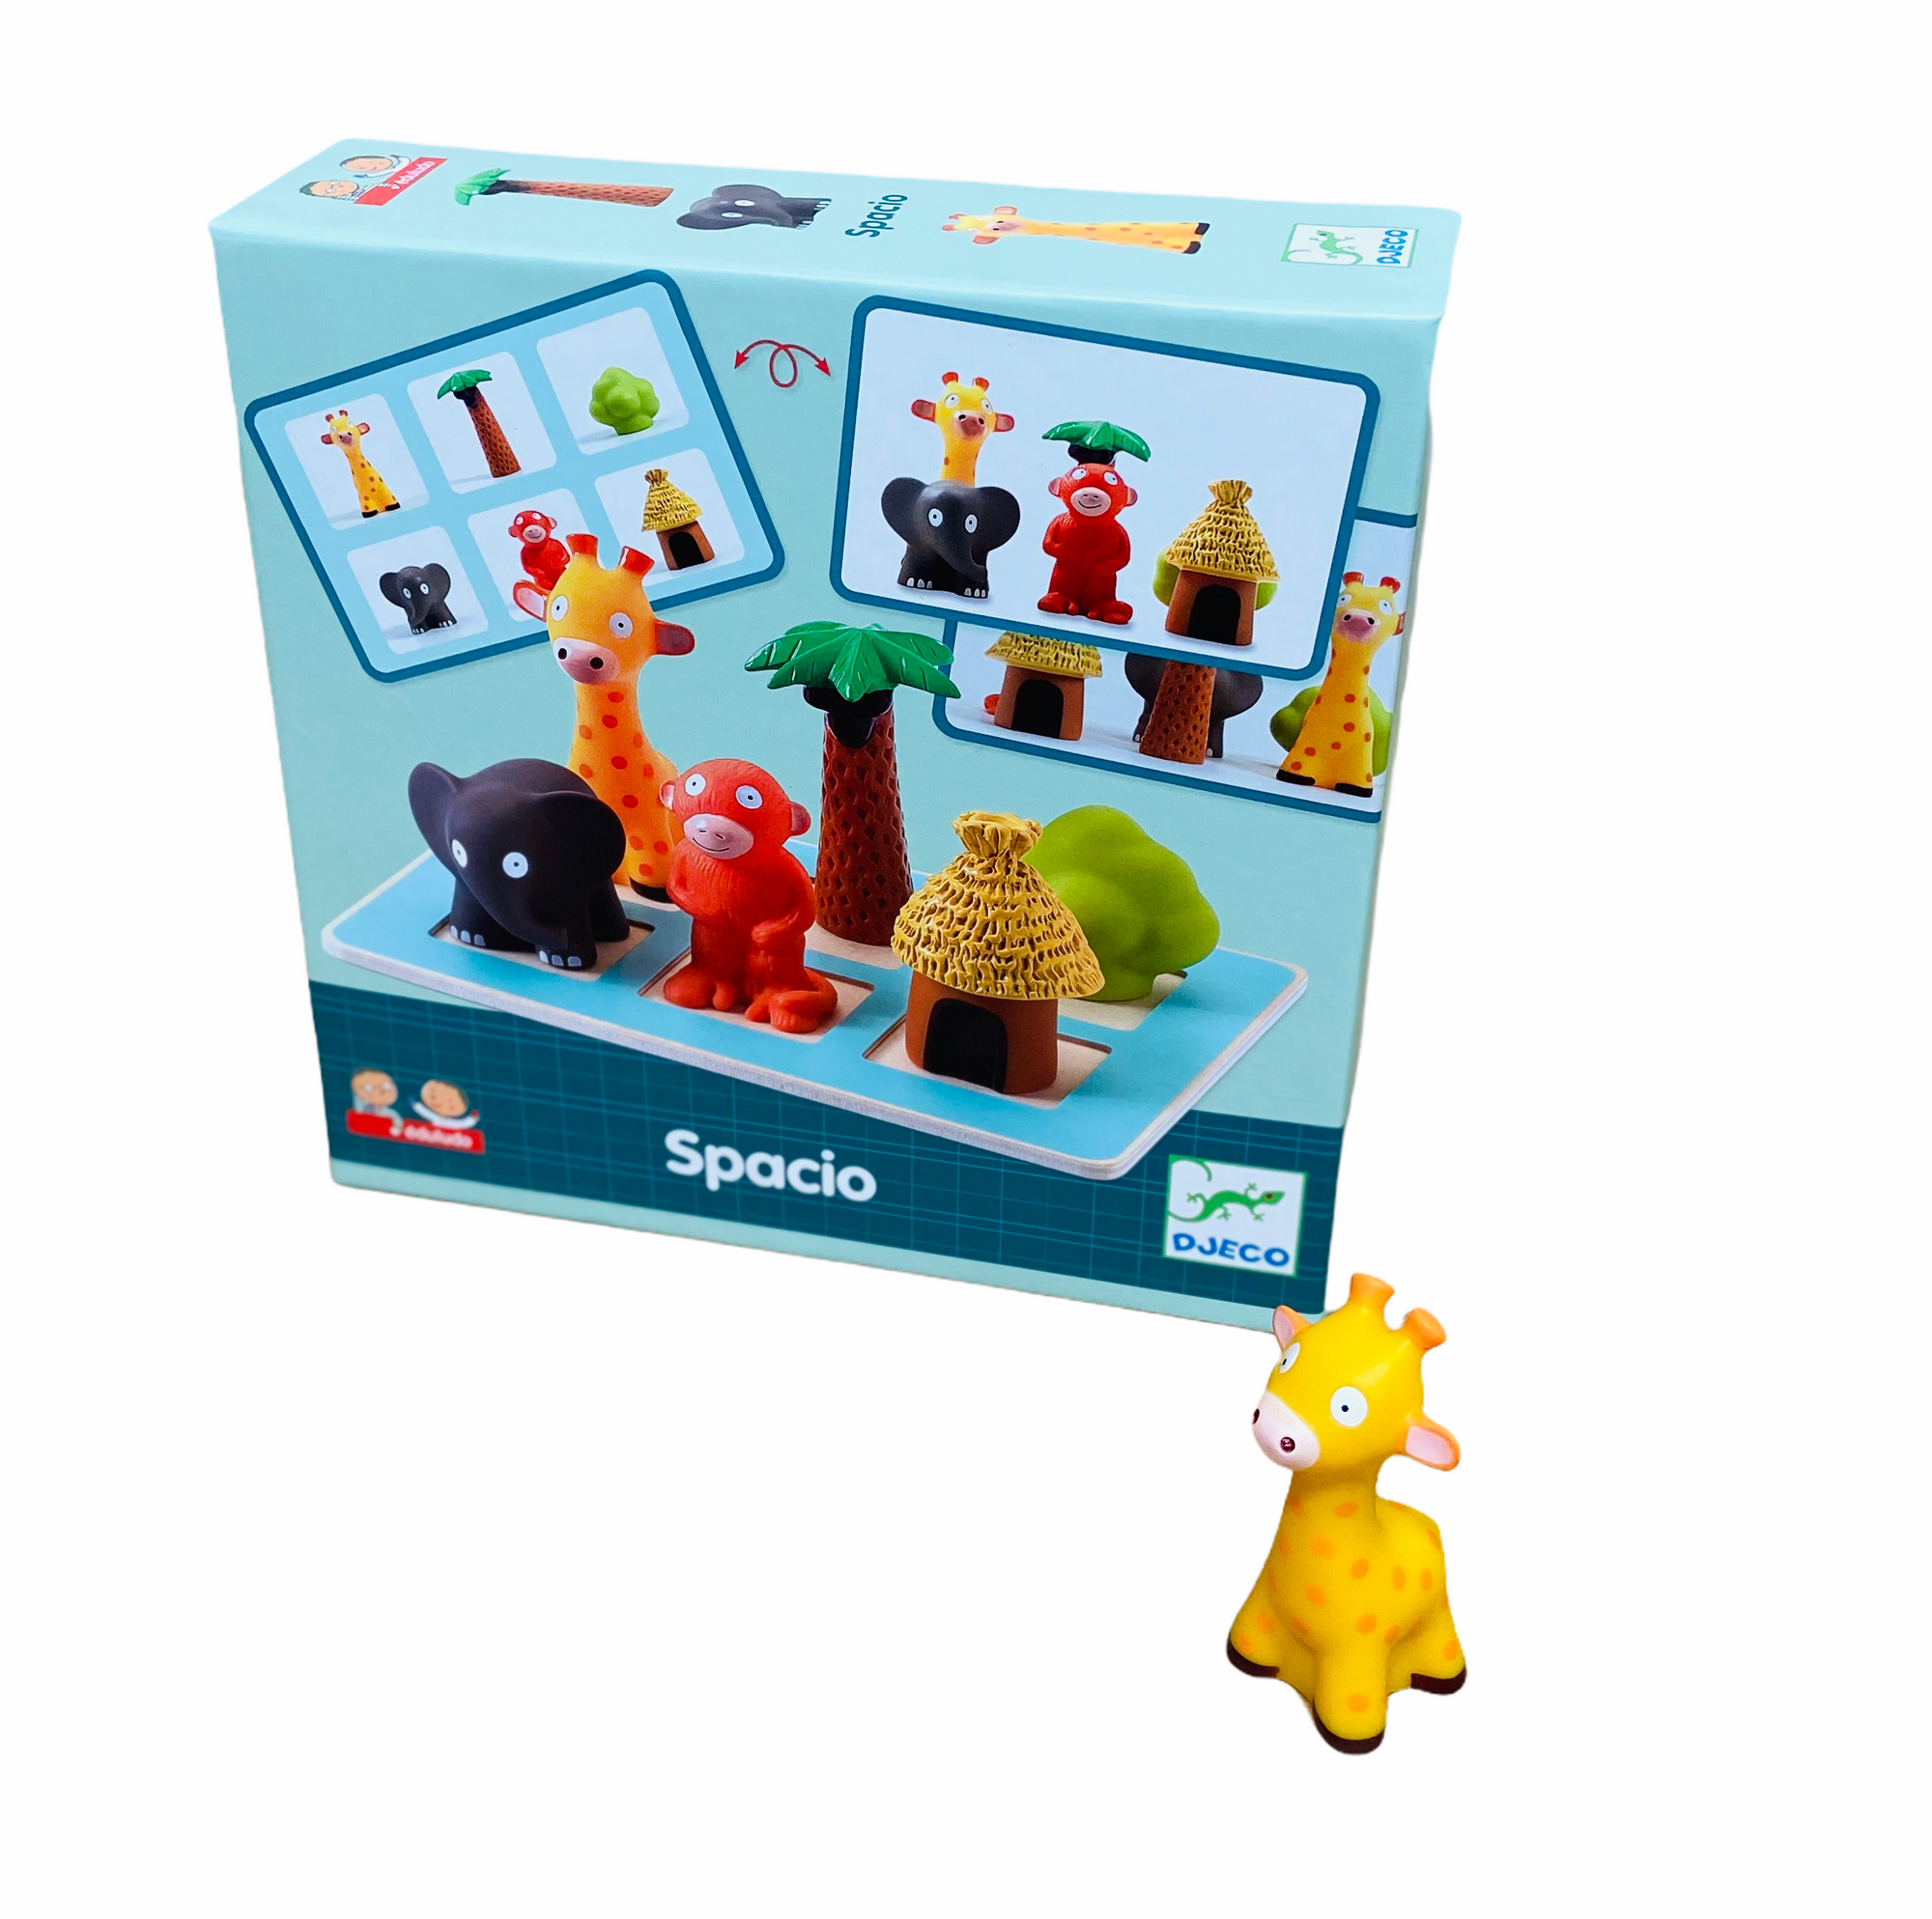 Djeco Spacio game packaging box with giraffe figure in front of it on white background 